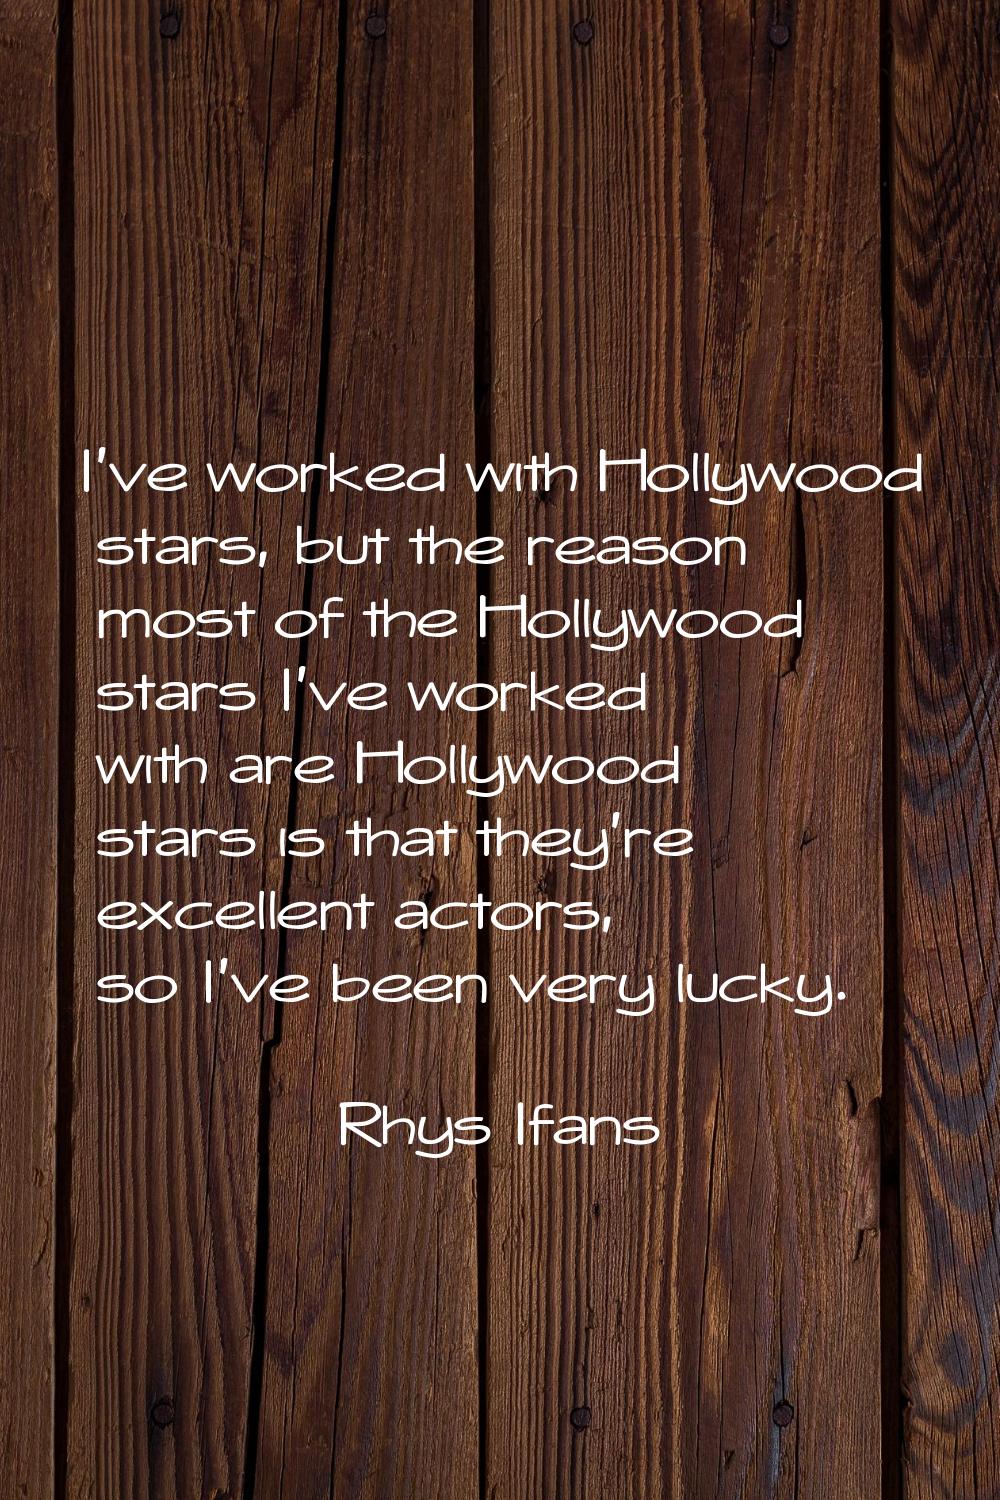 I've worked with Hollywood stars, but the reason most of the Hollywood stars I've worked with are H